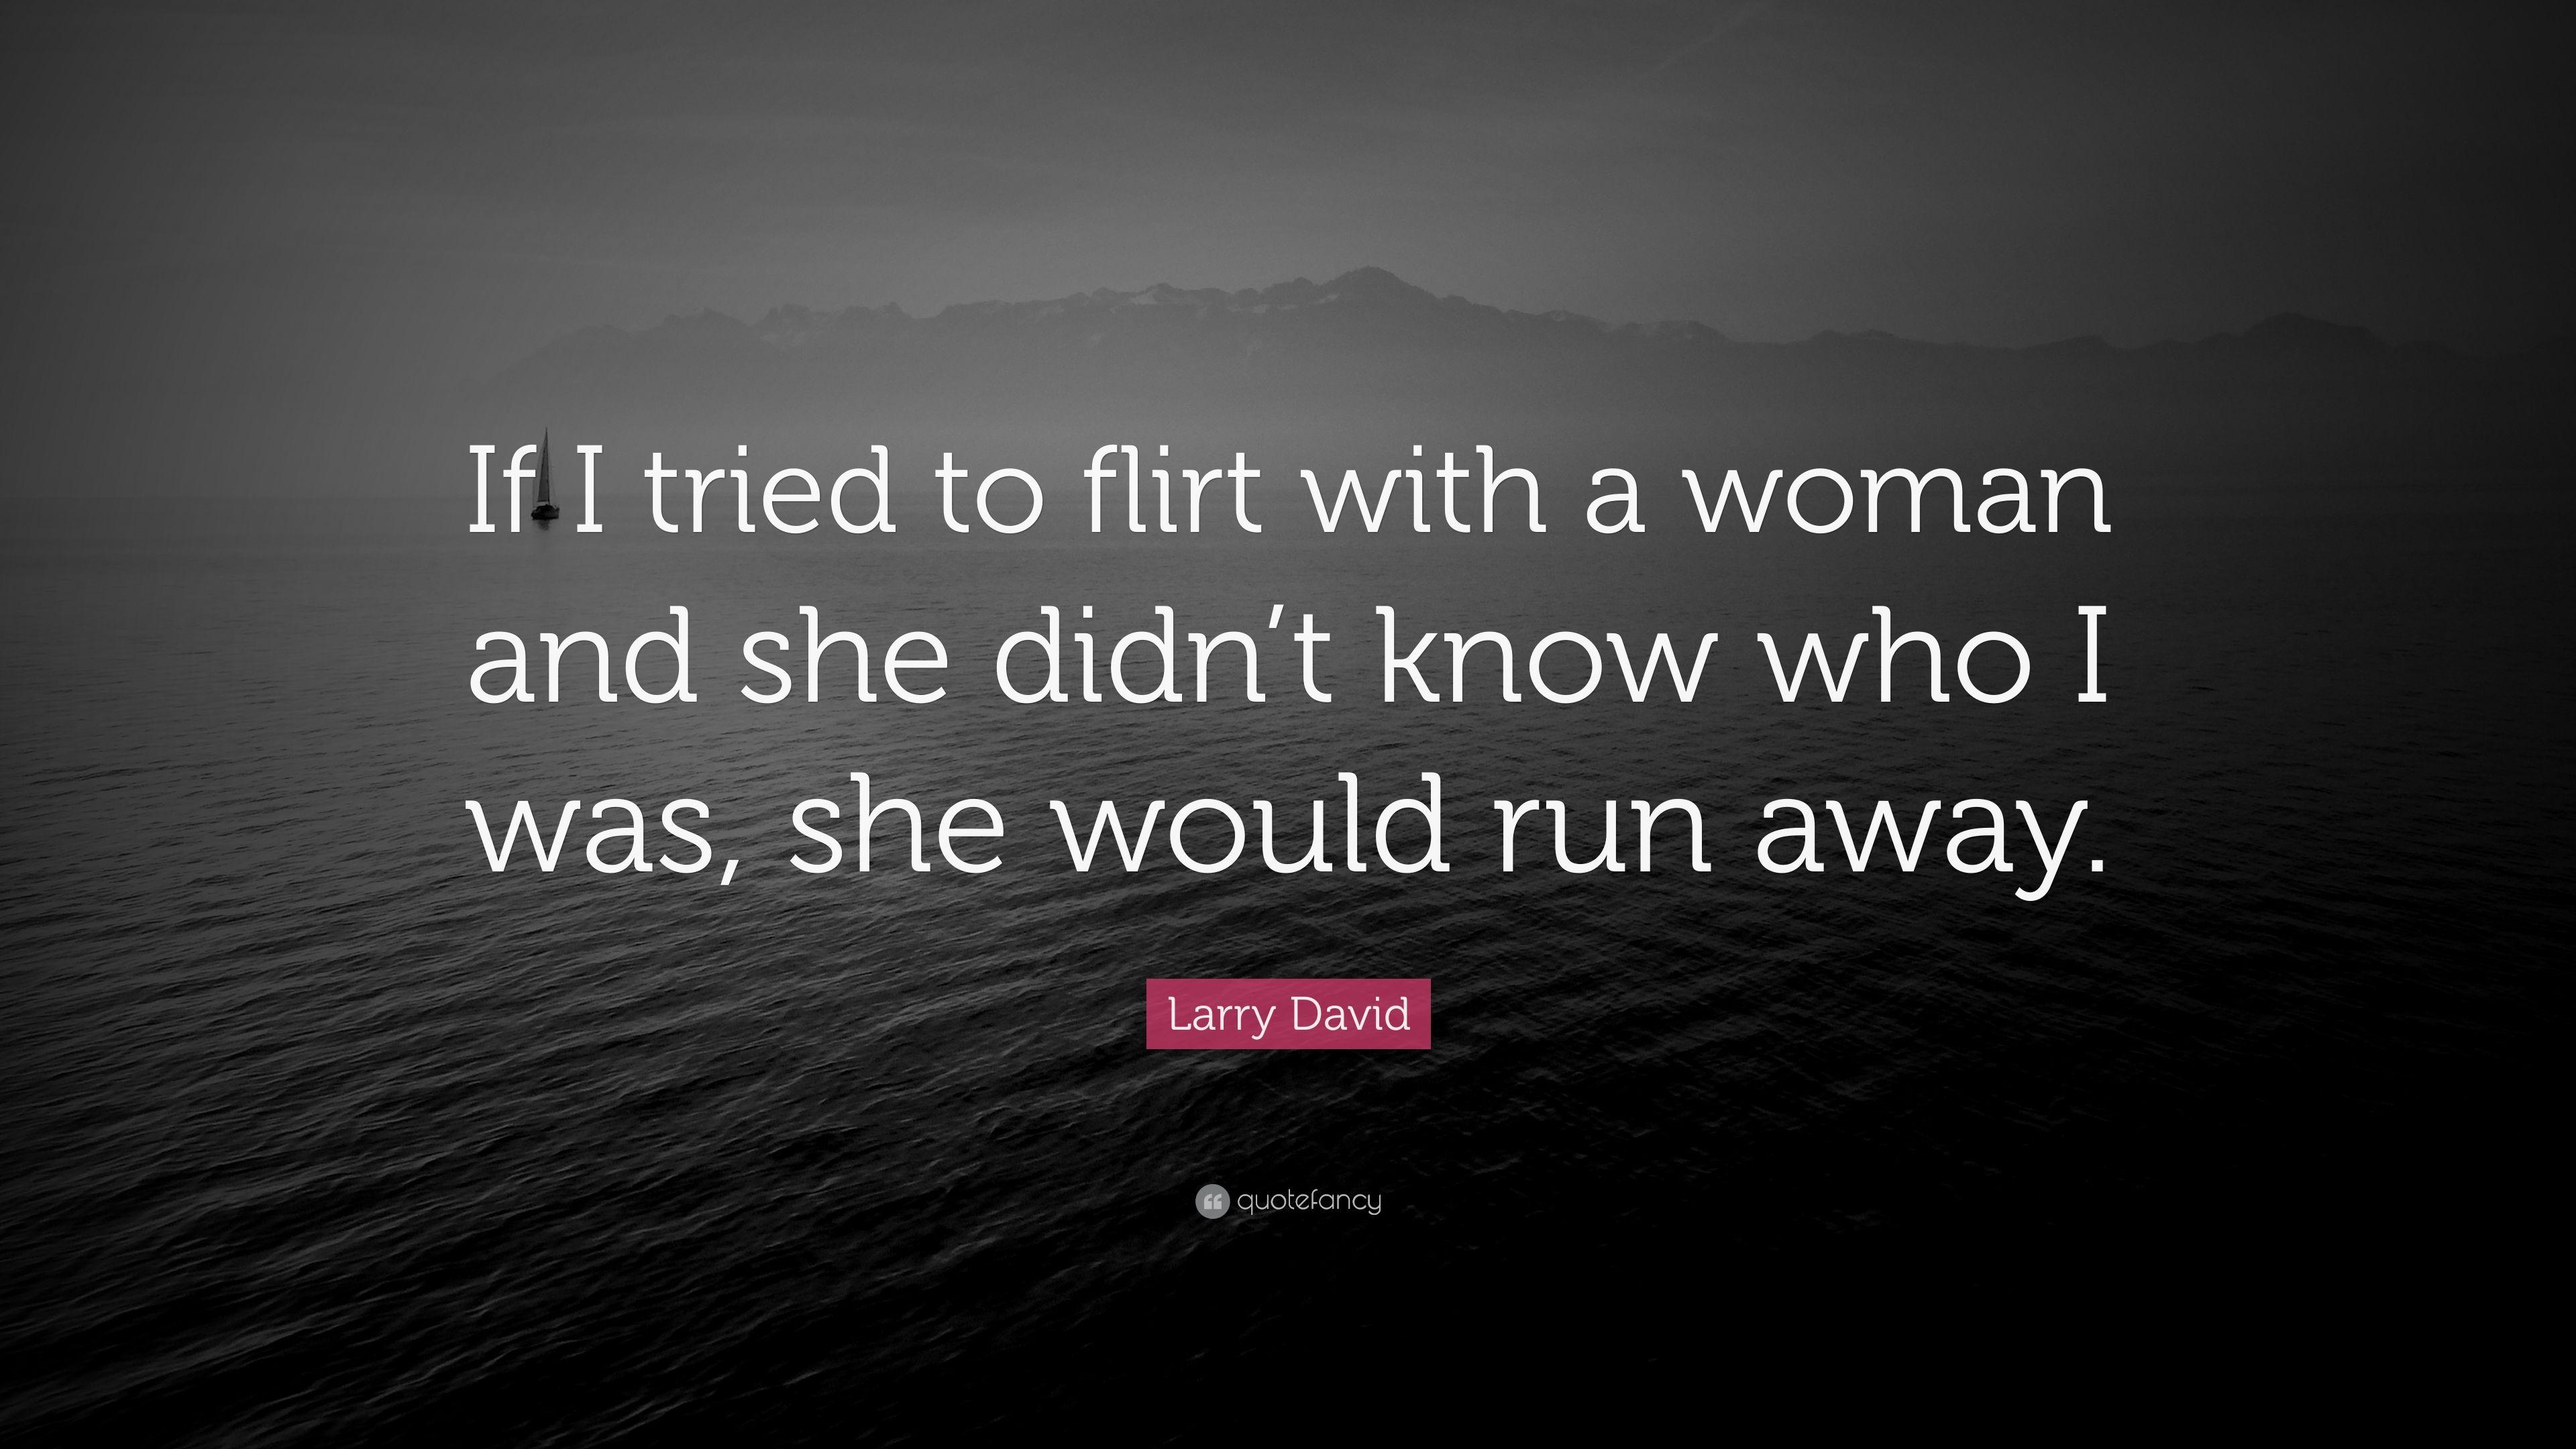 Larry David Quote: "If I tried to flirt with a woman and she didn&apos...